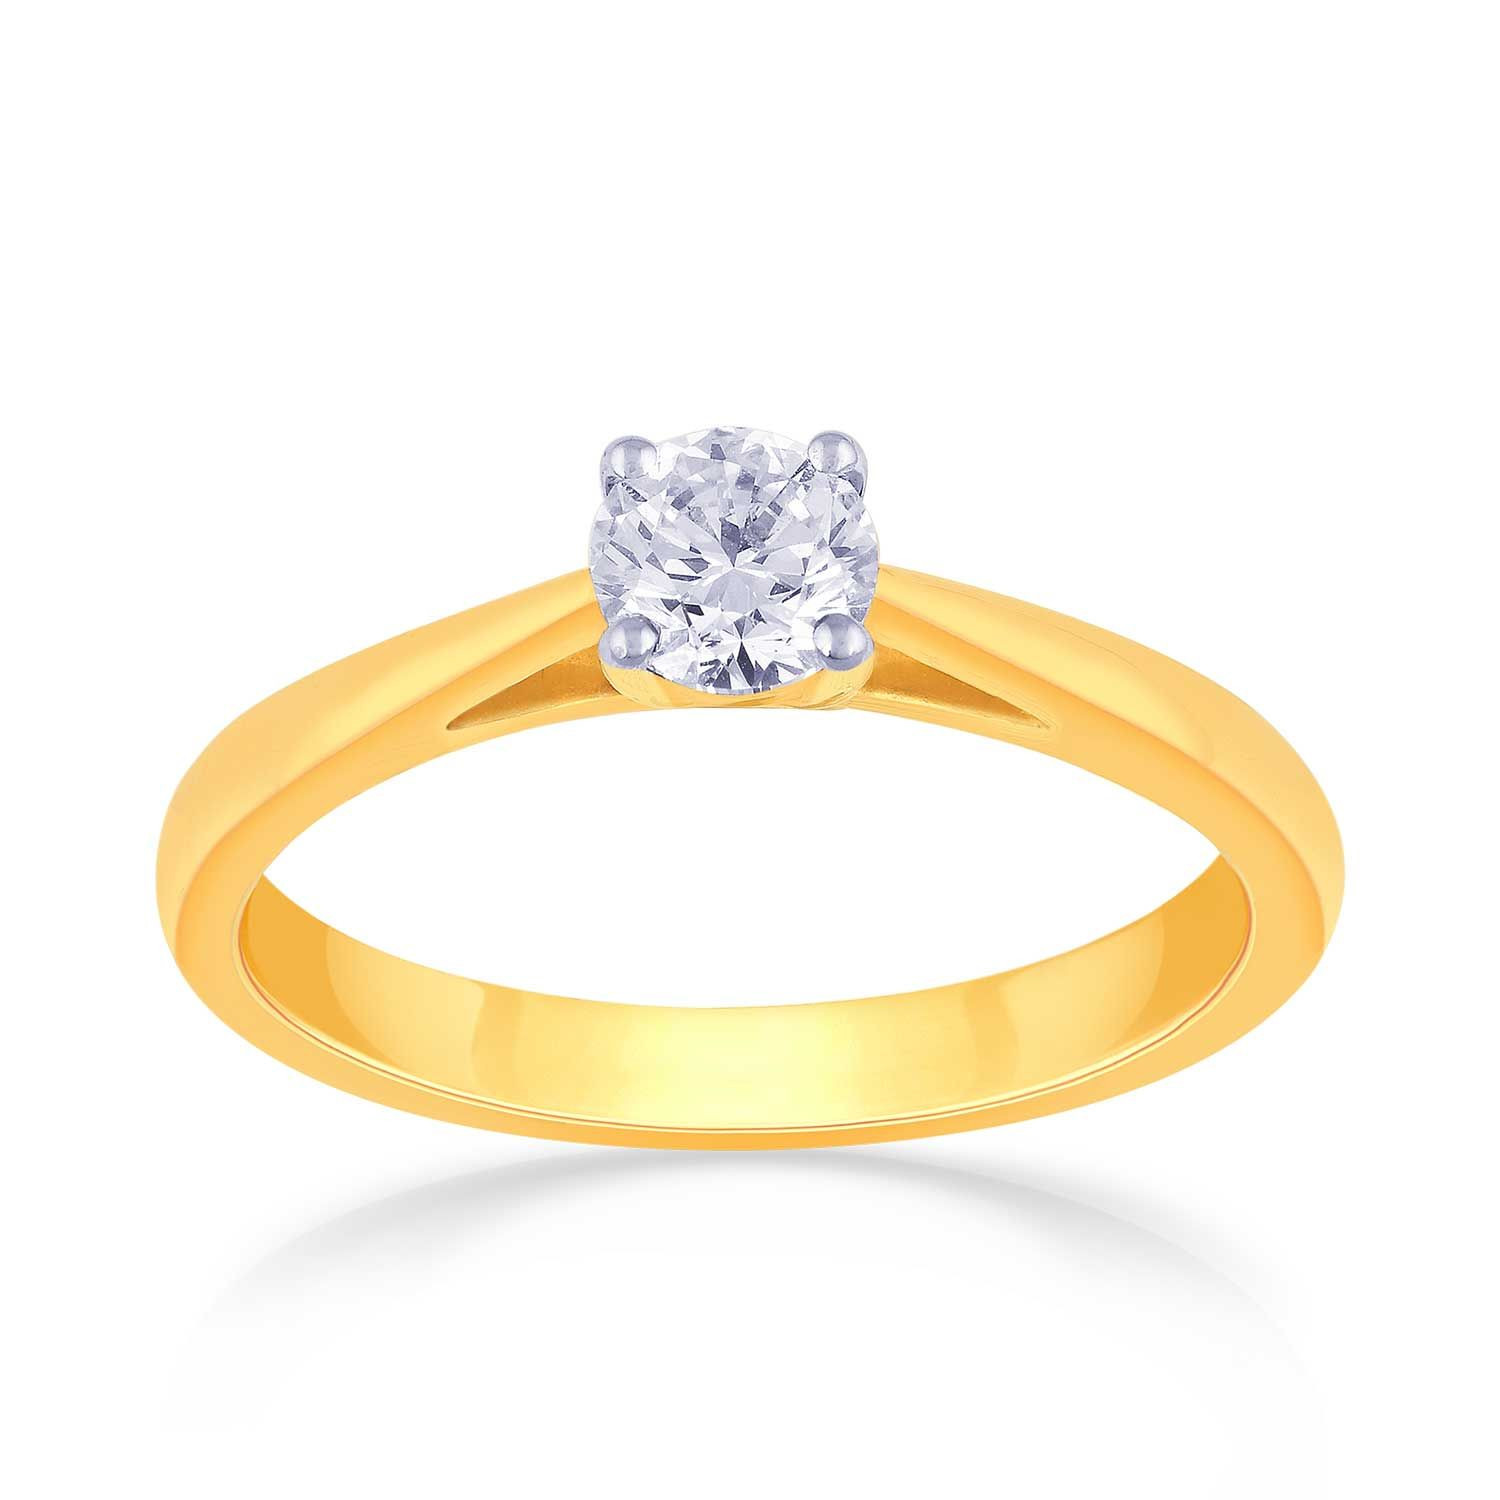 Buy Gold Diamond Rings at Best Prices Online at Tata CLiQ